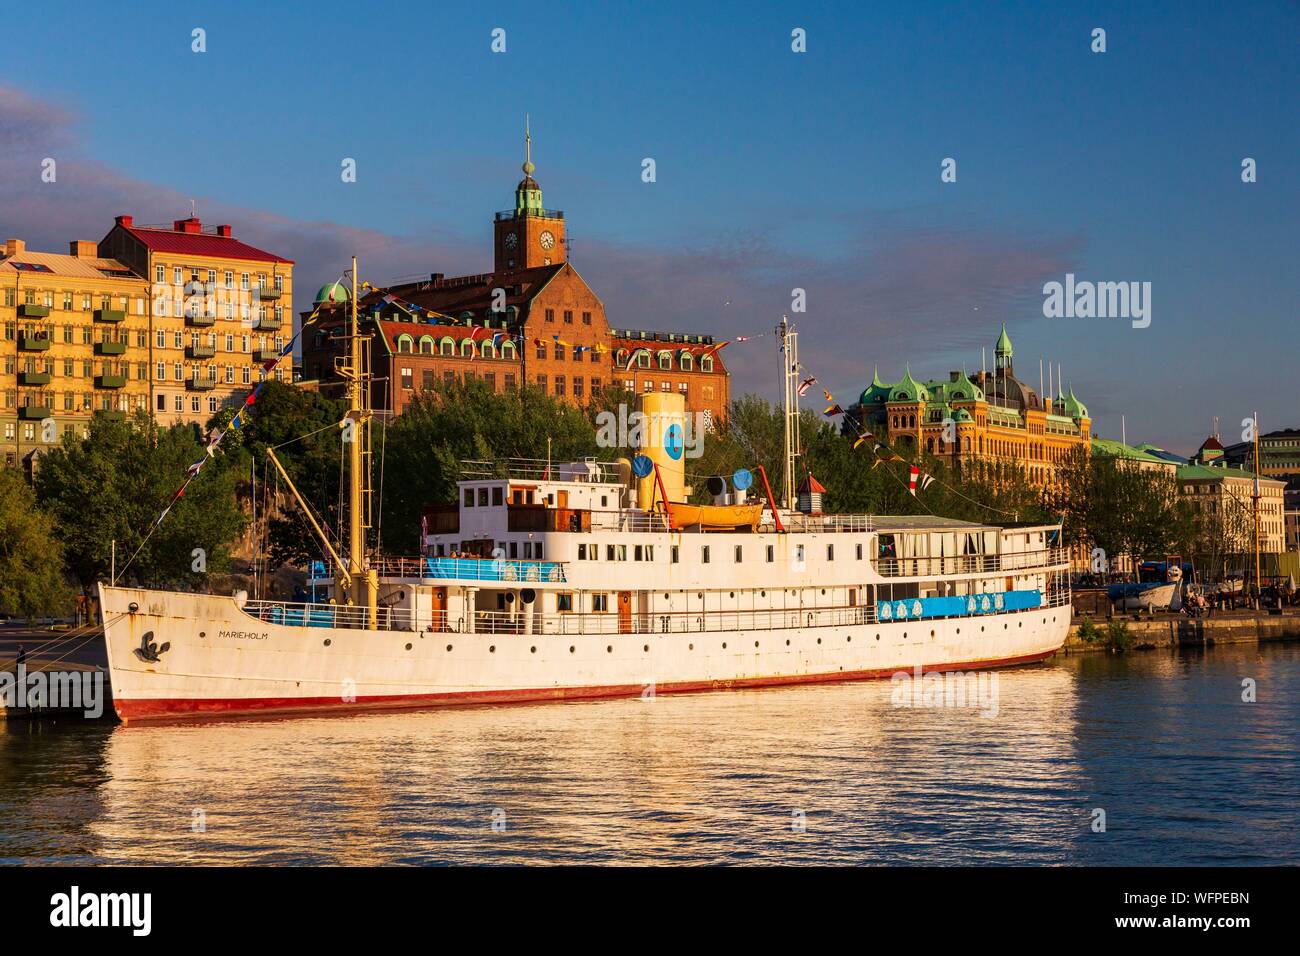 Sweden, Vastra Gotaland, Goteborg (Gothenburg), floating maritime museum, the boat restaurant Marieholm and view on Kvarnberget and its clock and the buildings of the company ASECO on Packhusplatsen Stock Photo